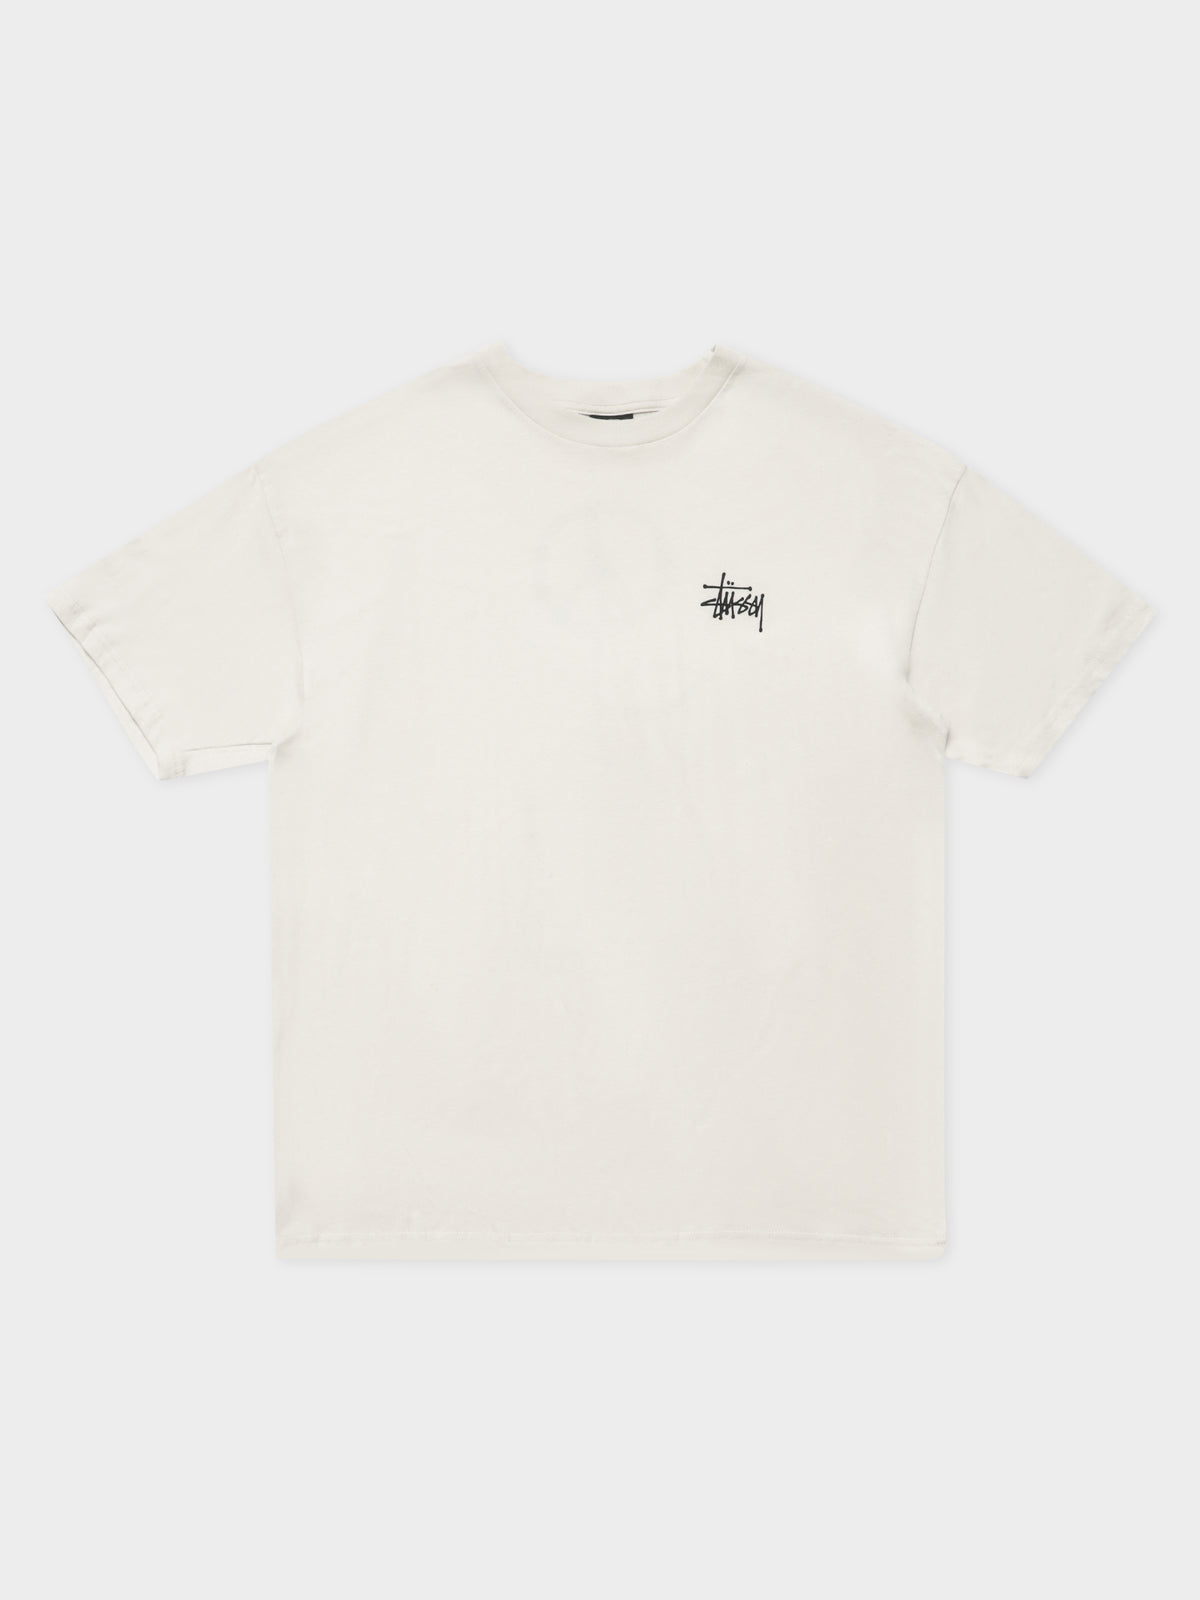 Handle With Care T-Shirt in White